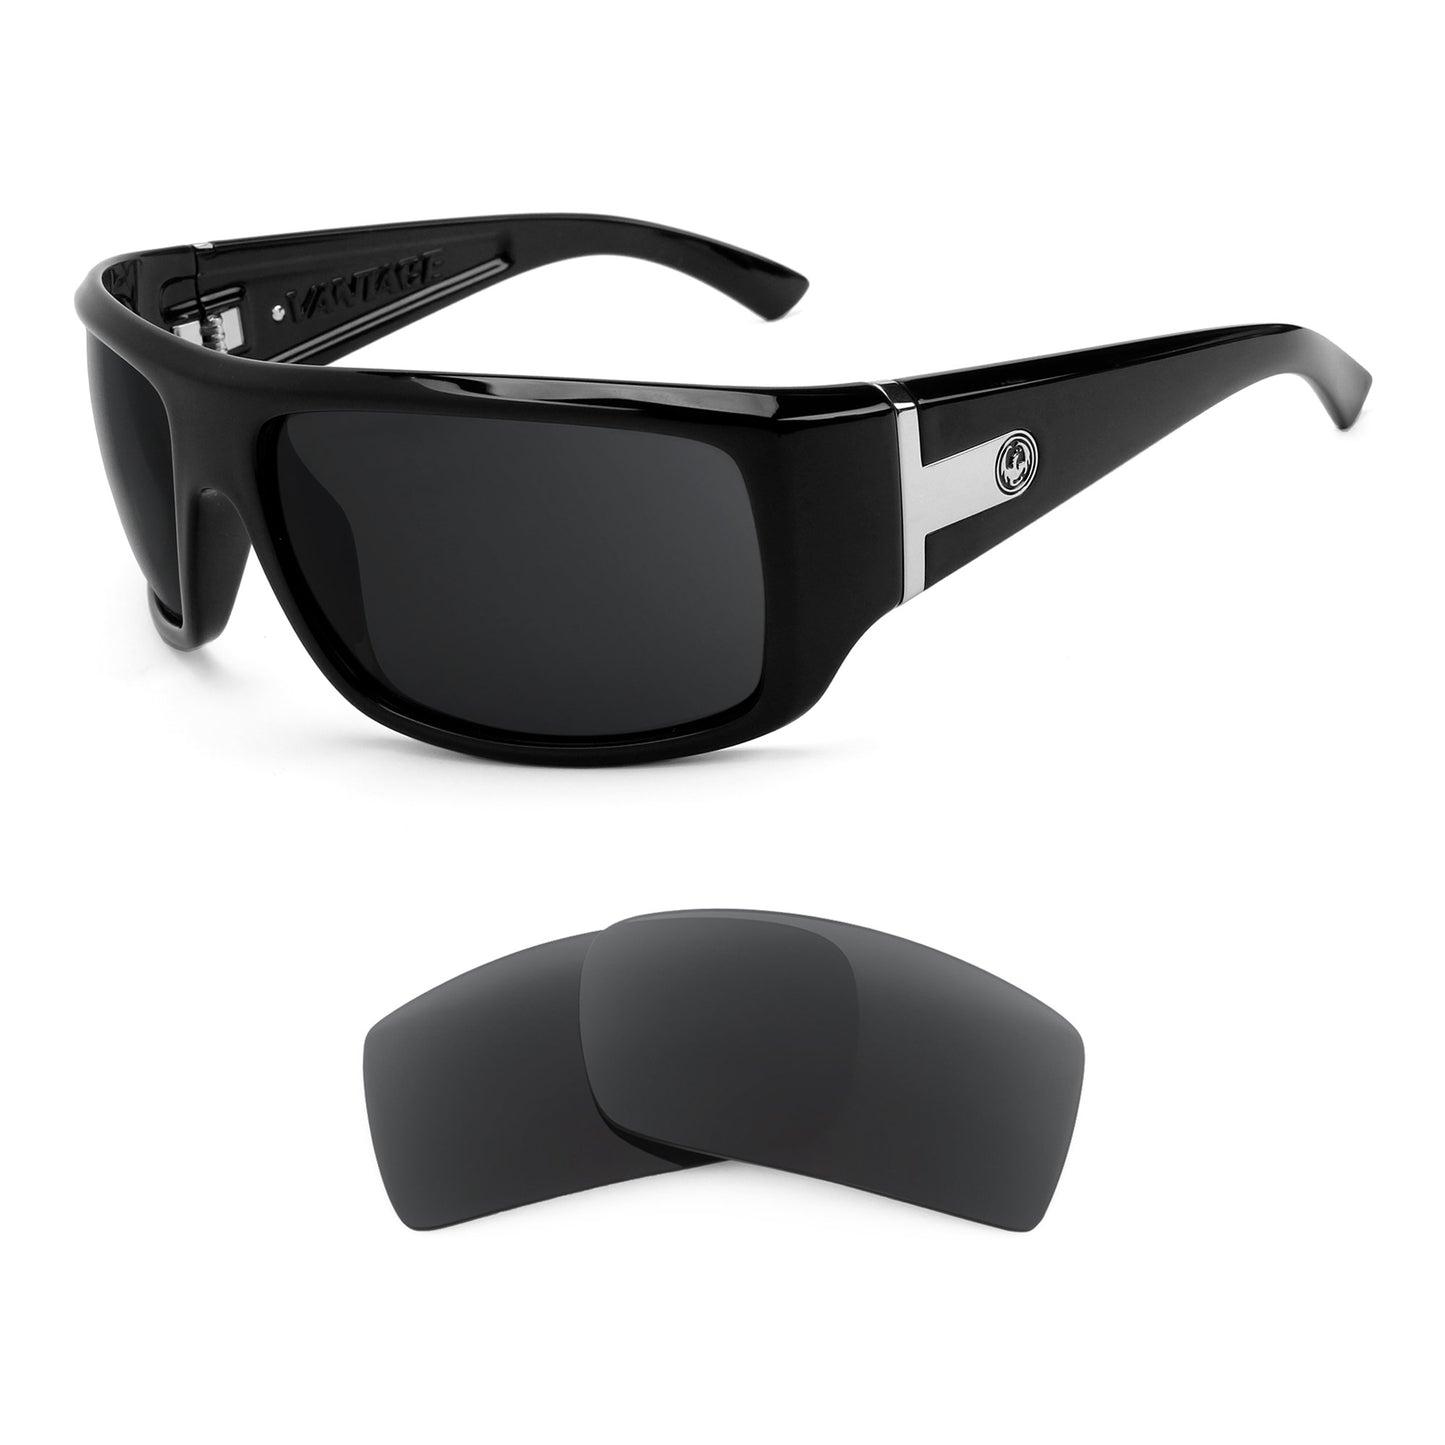 Dragon Vantage sunglasses with replacement lenses